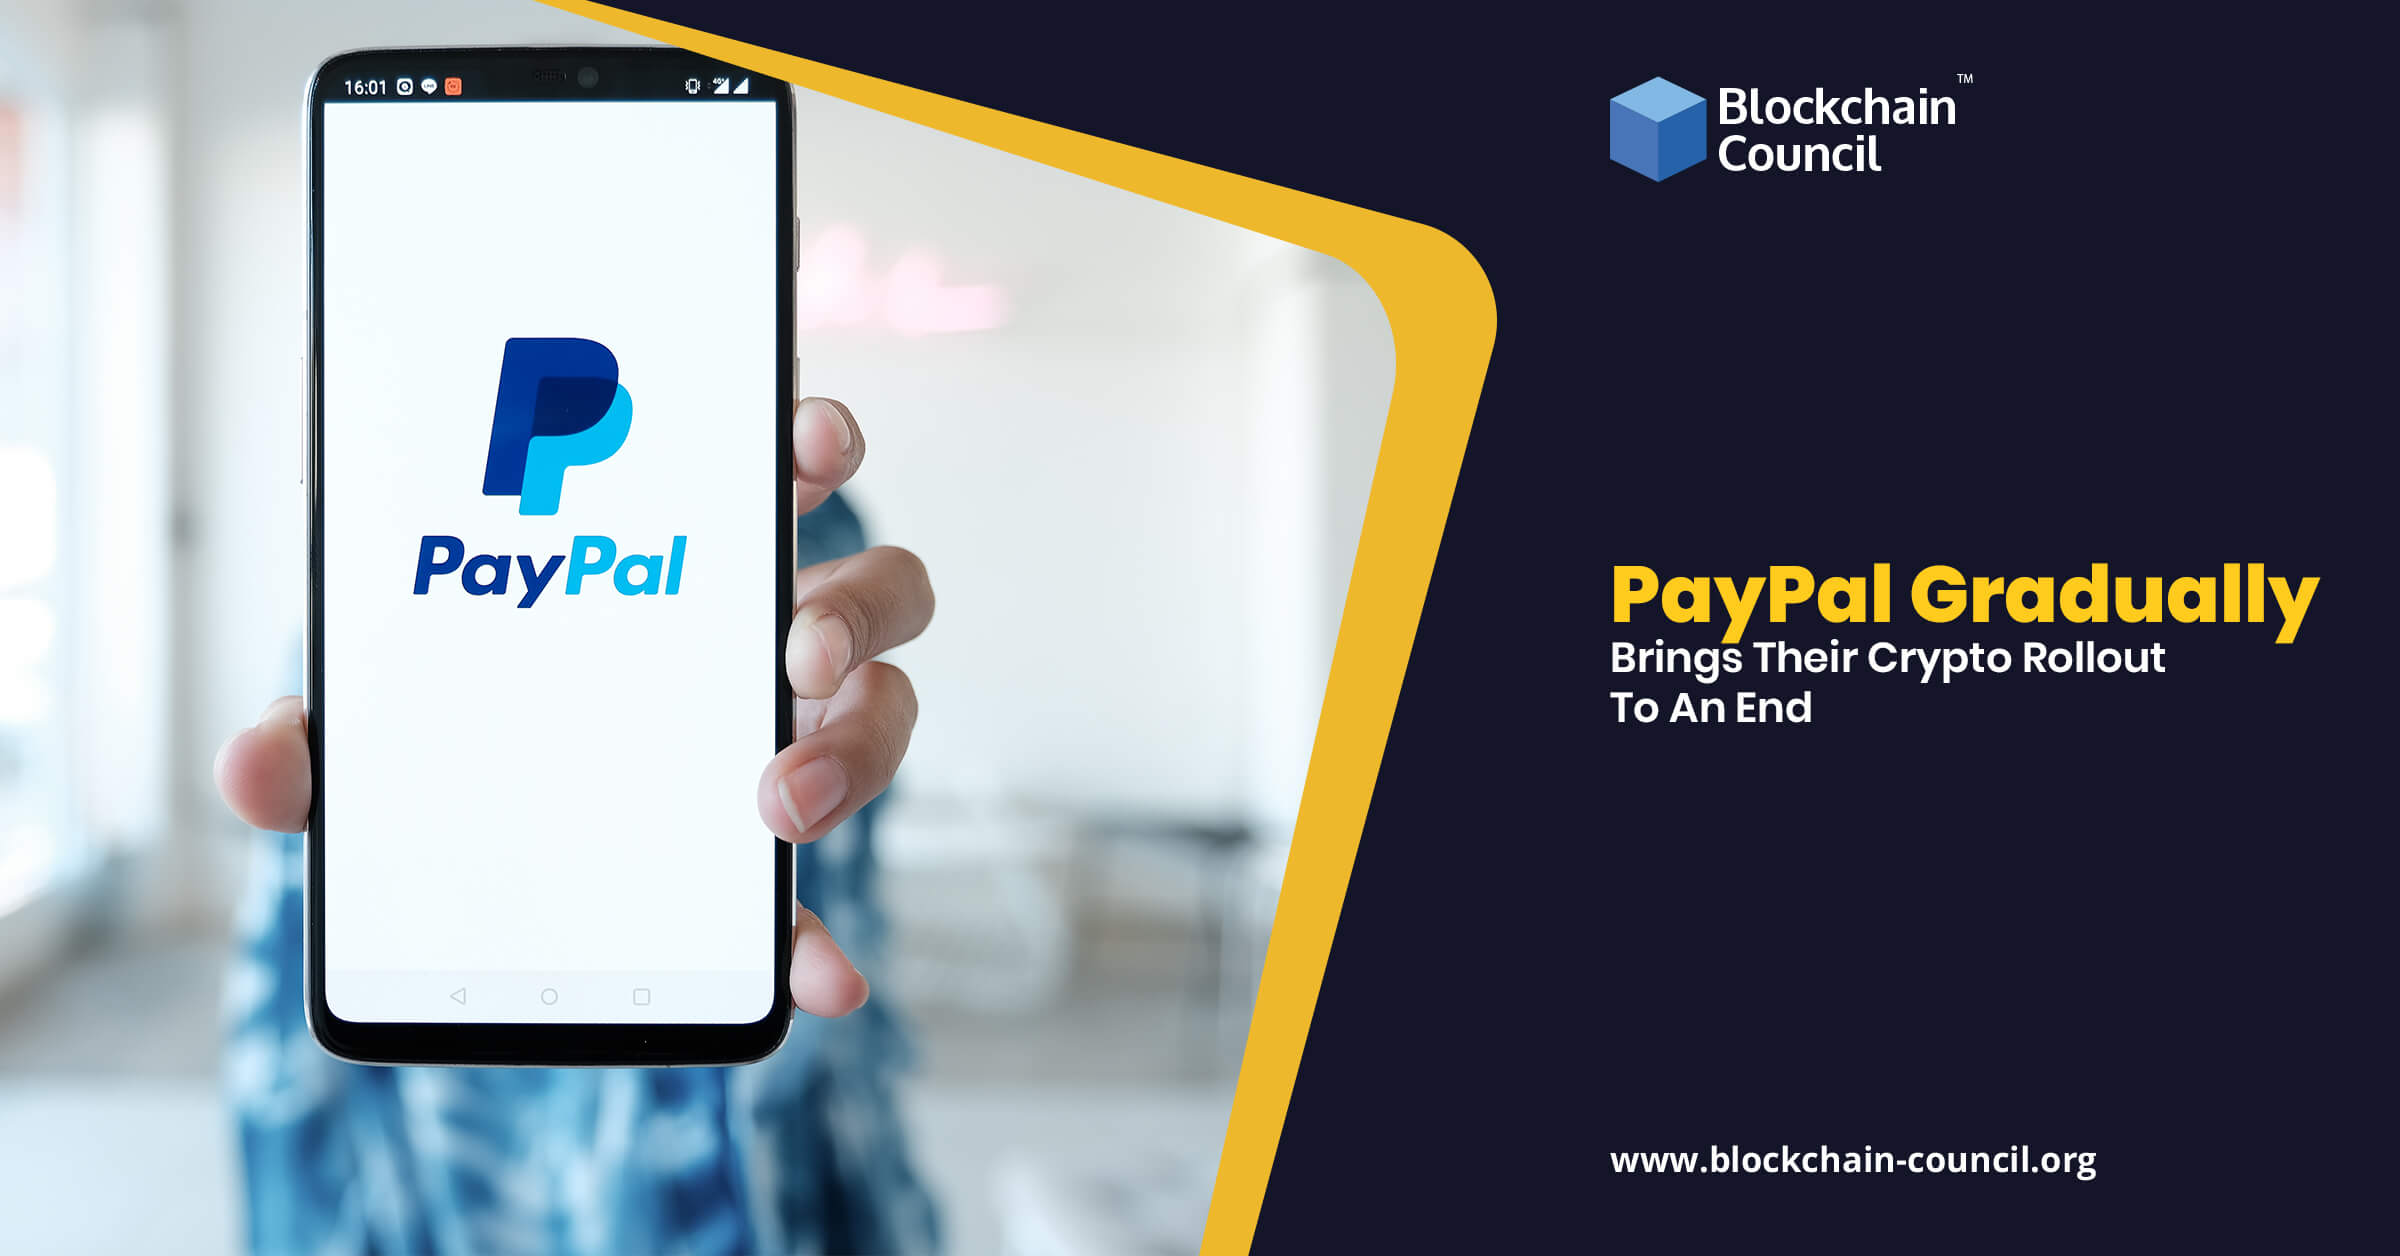 PayPal Gradually Brings Their Crypto Rollout To An End